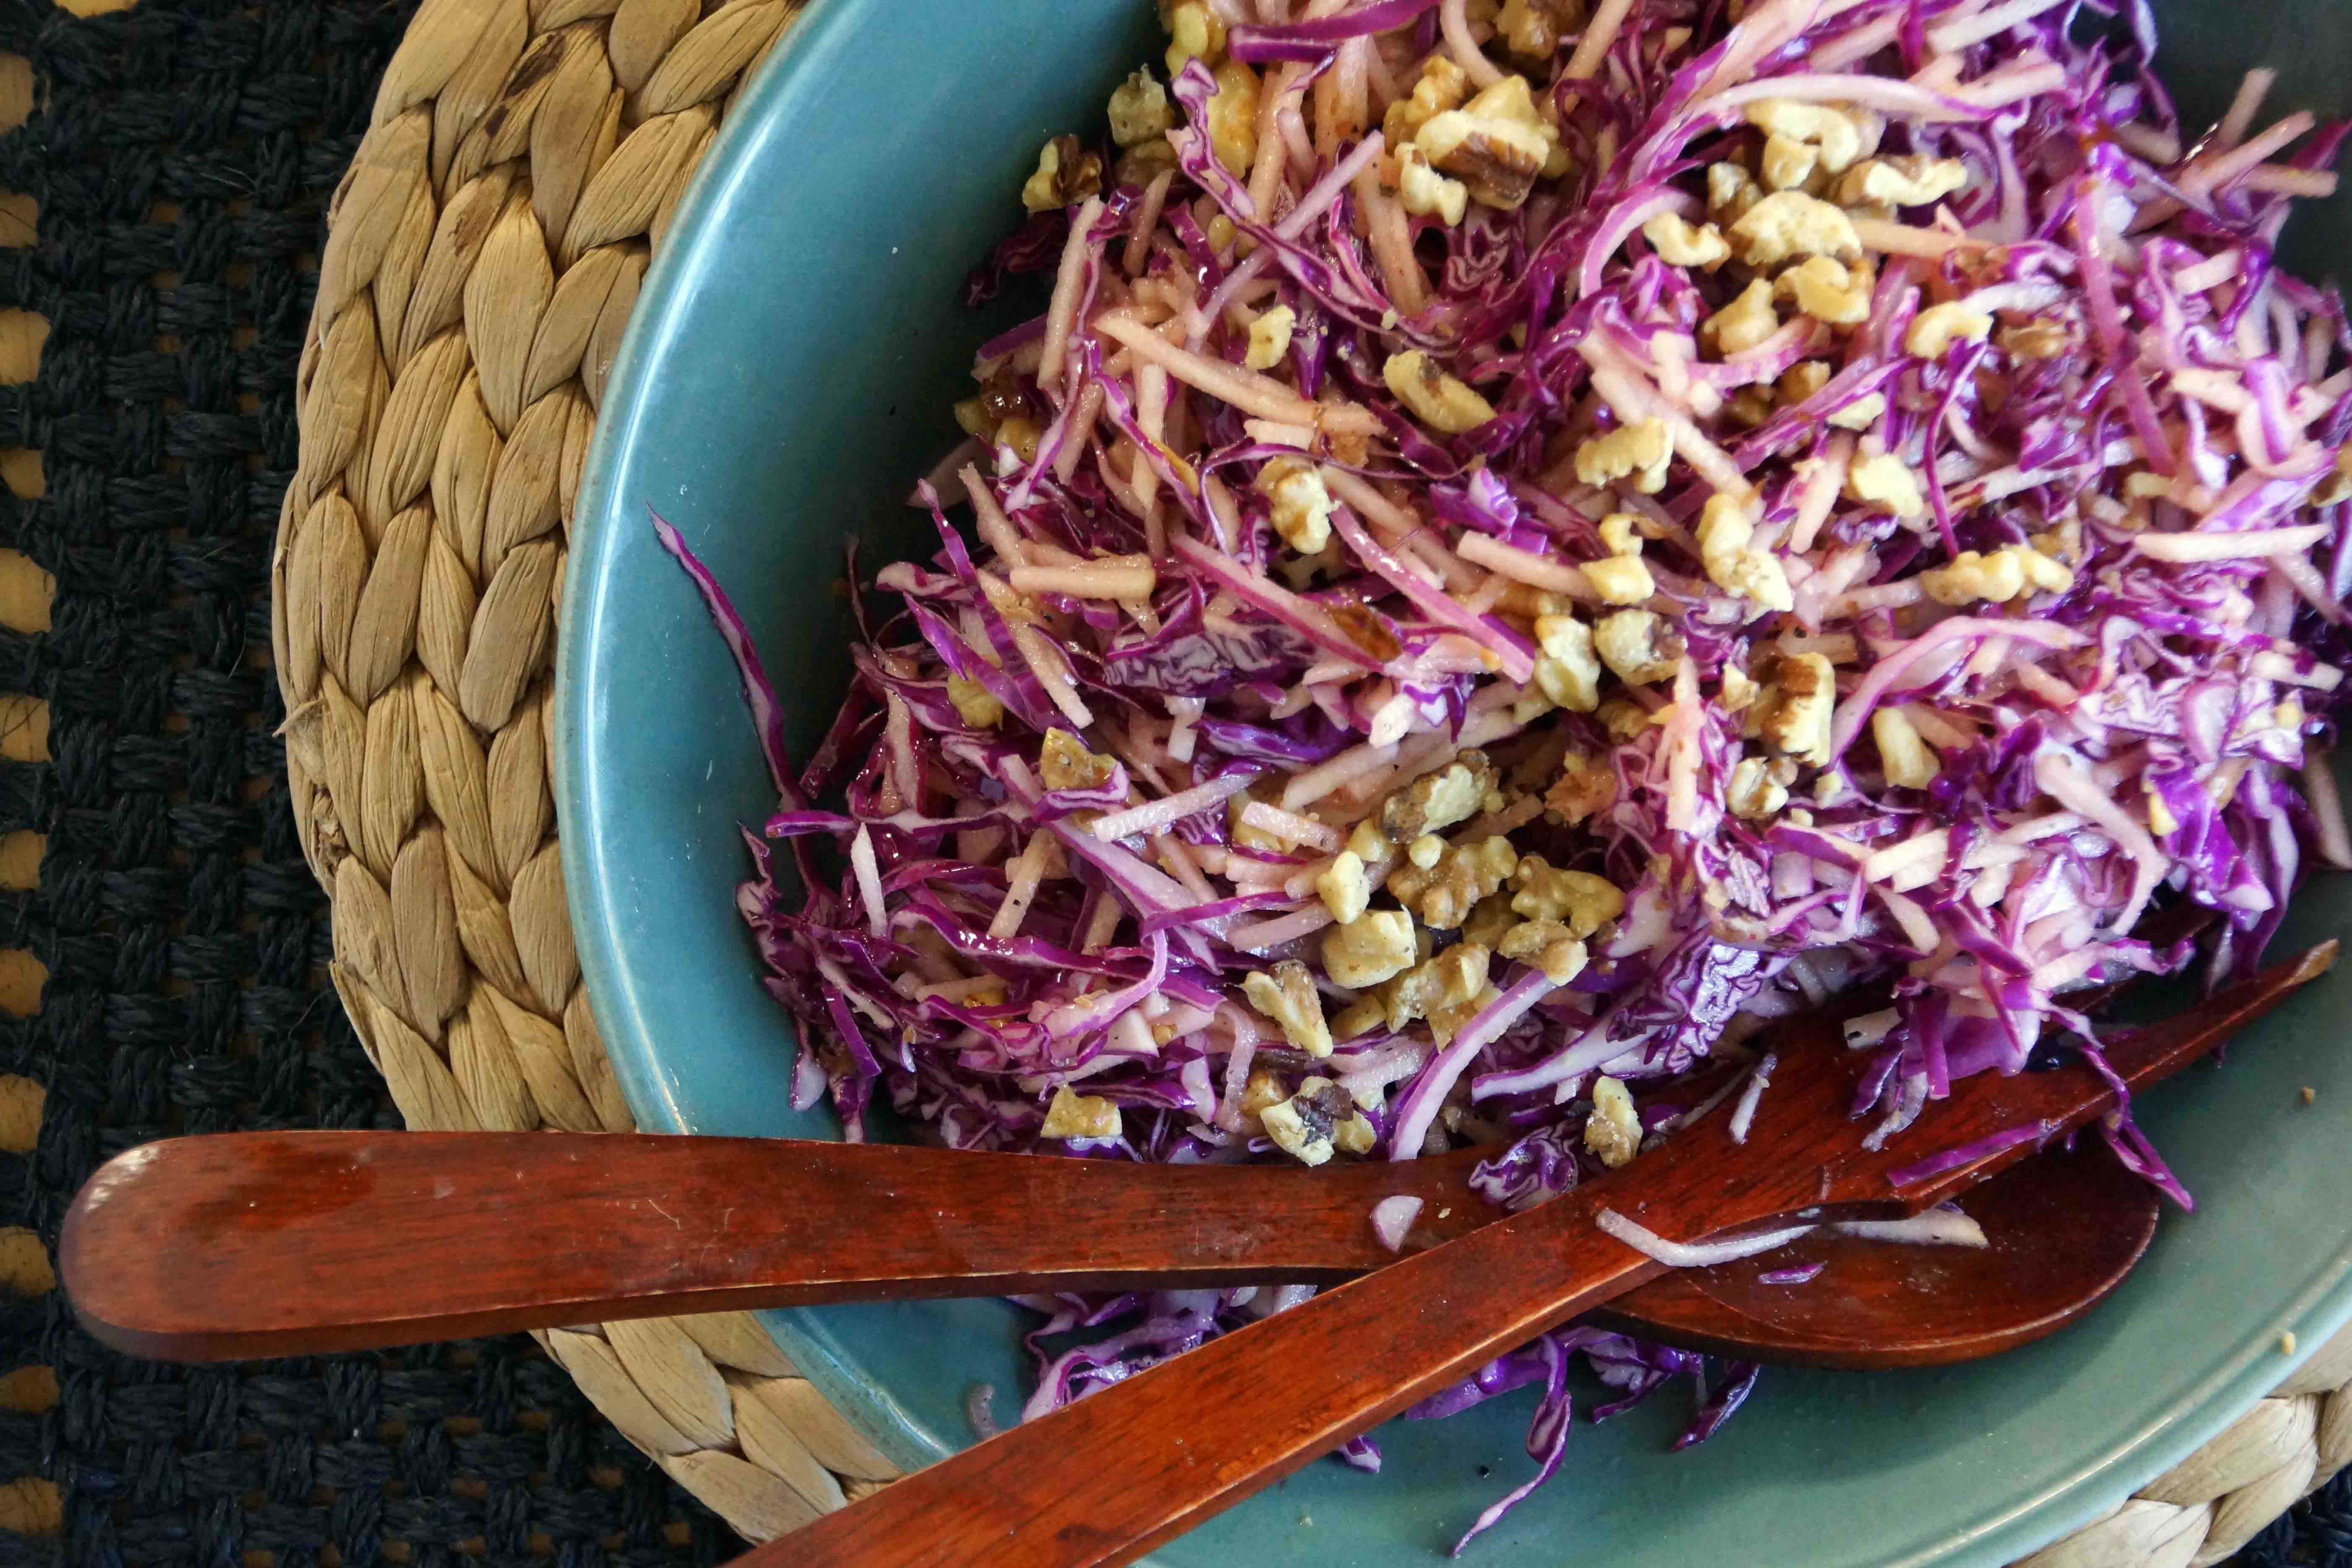 Red cabbage salad